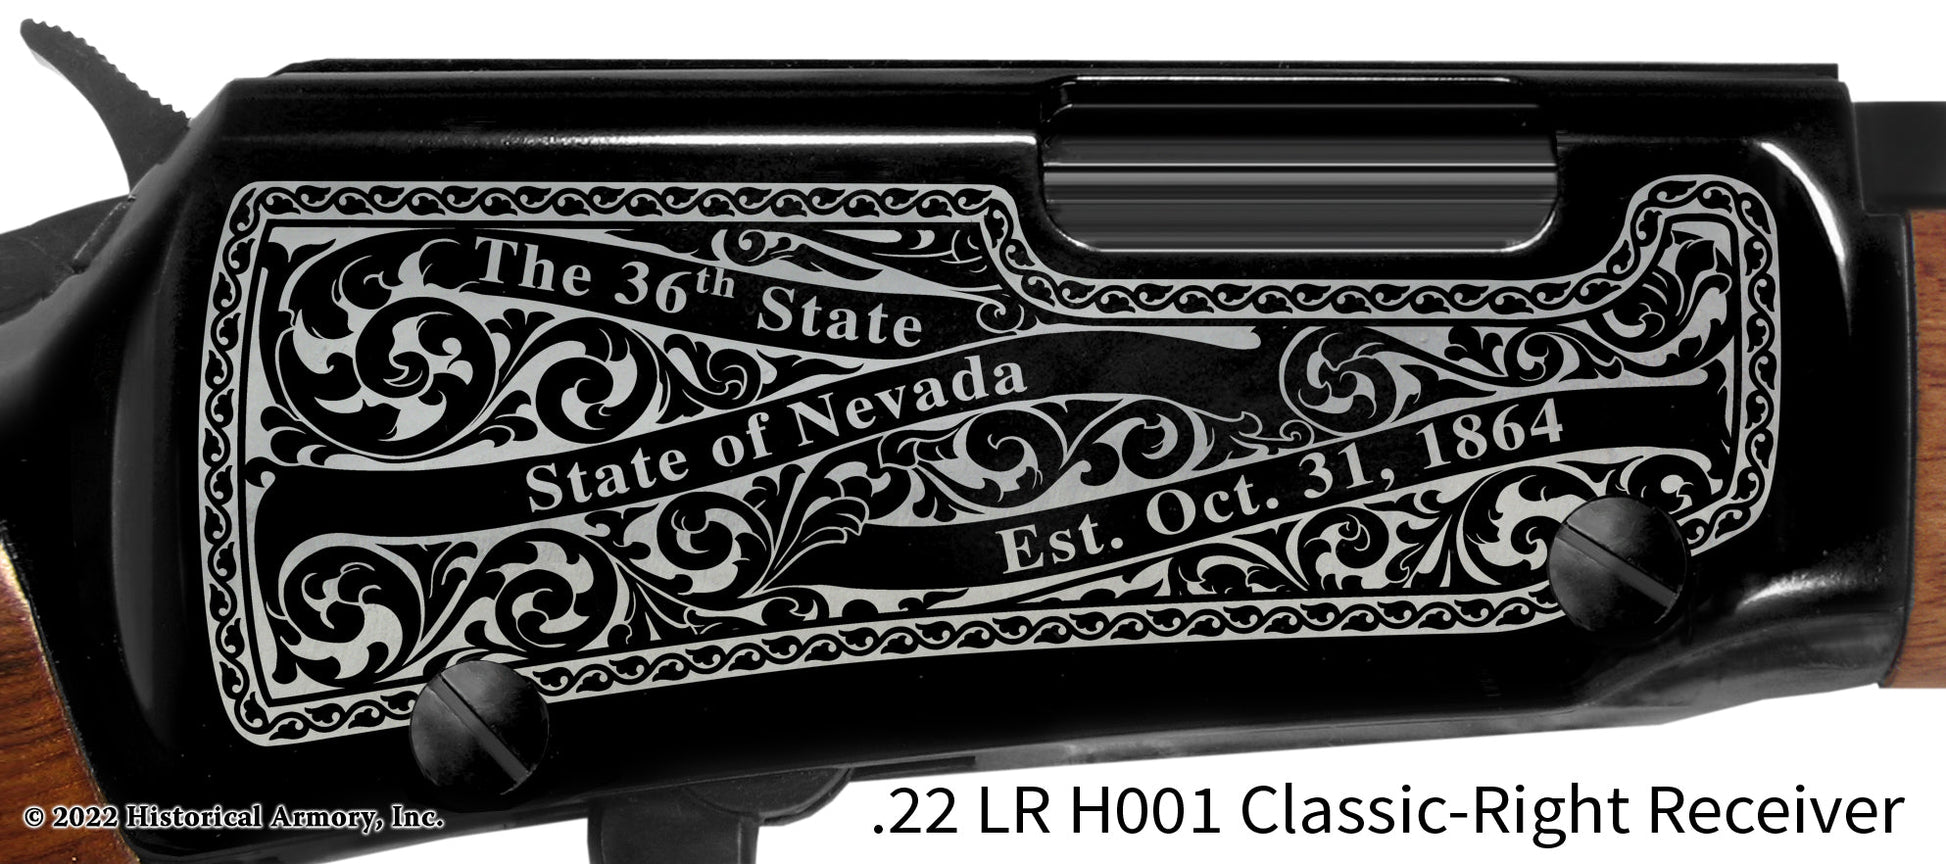 Humboldt County Nevada Engraved Henry H001 Rifle